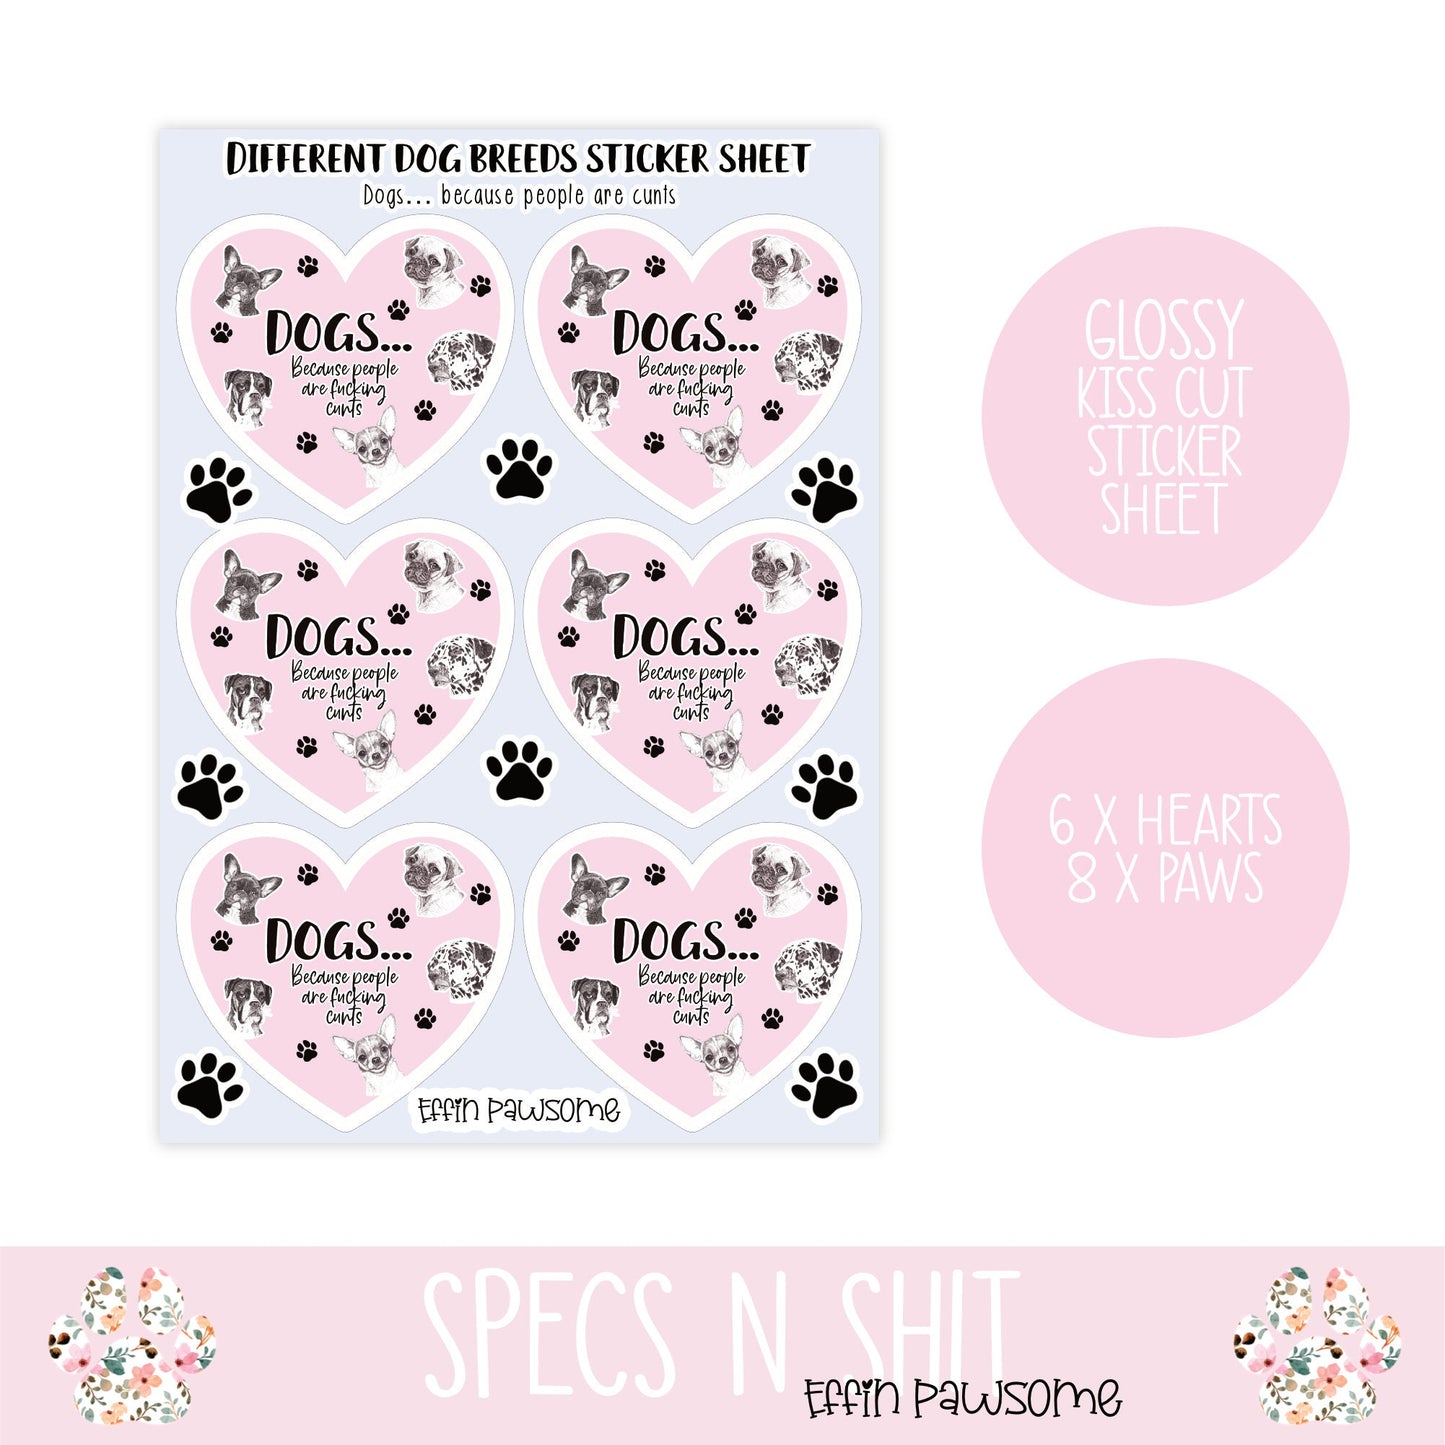 Funny Dog Sticker Sheet | Dog Stickers | Pet stickers | Sticker Sheet | Journal Stickers | Novelty Gift Idea | Funny Decals | Dog Lovers